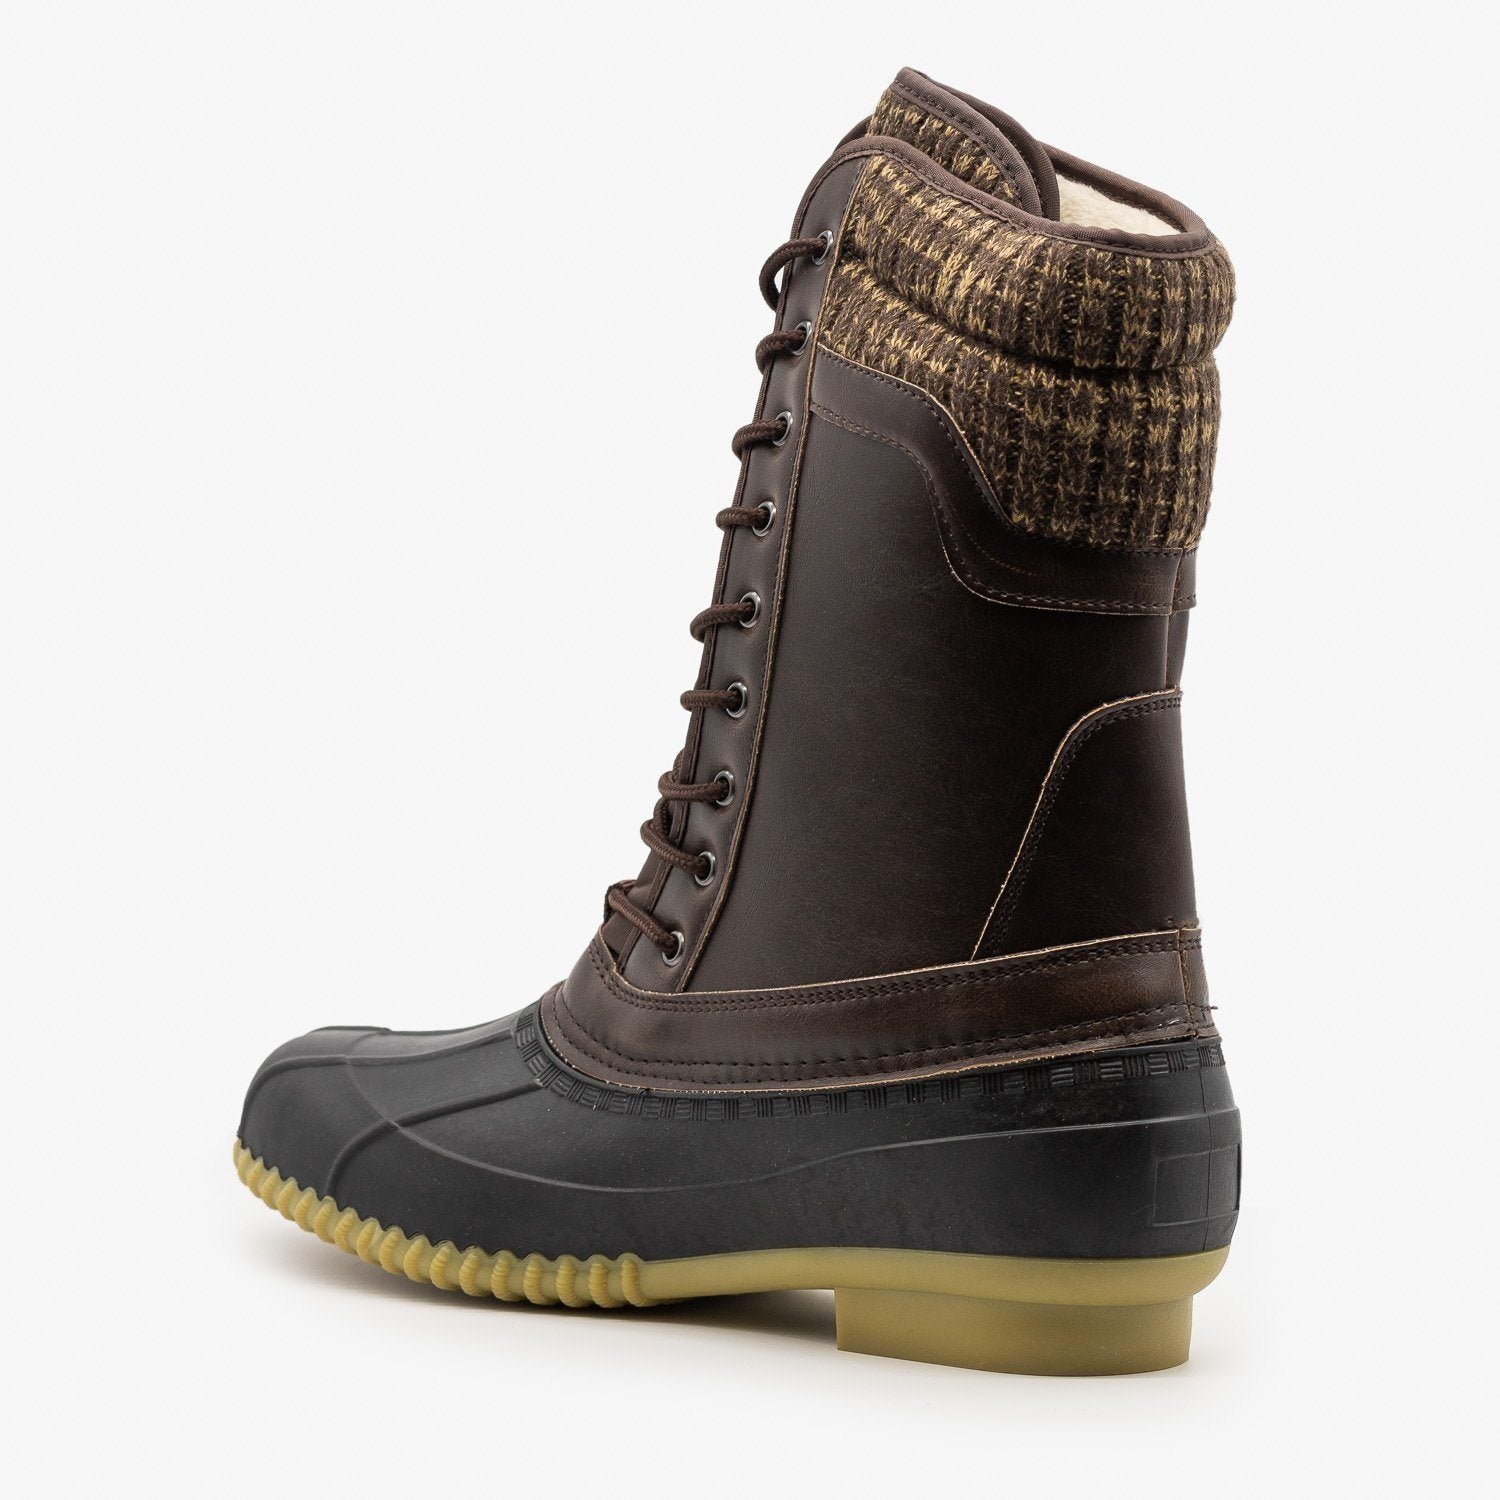 Autumn Duck Boots - Refresh Shoes 